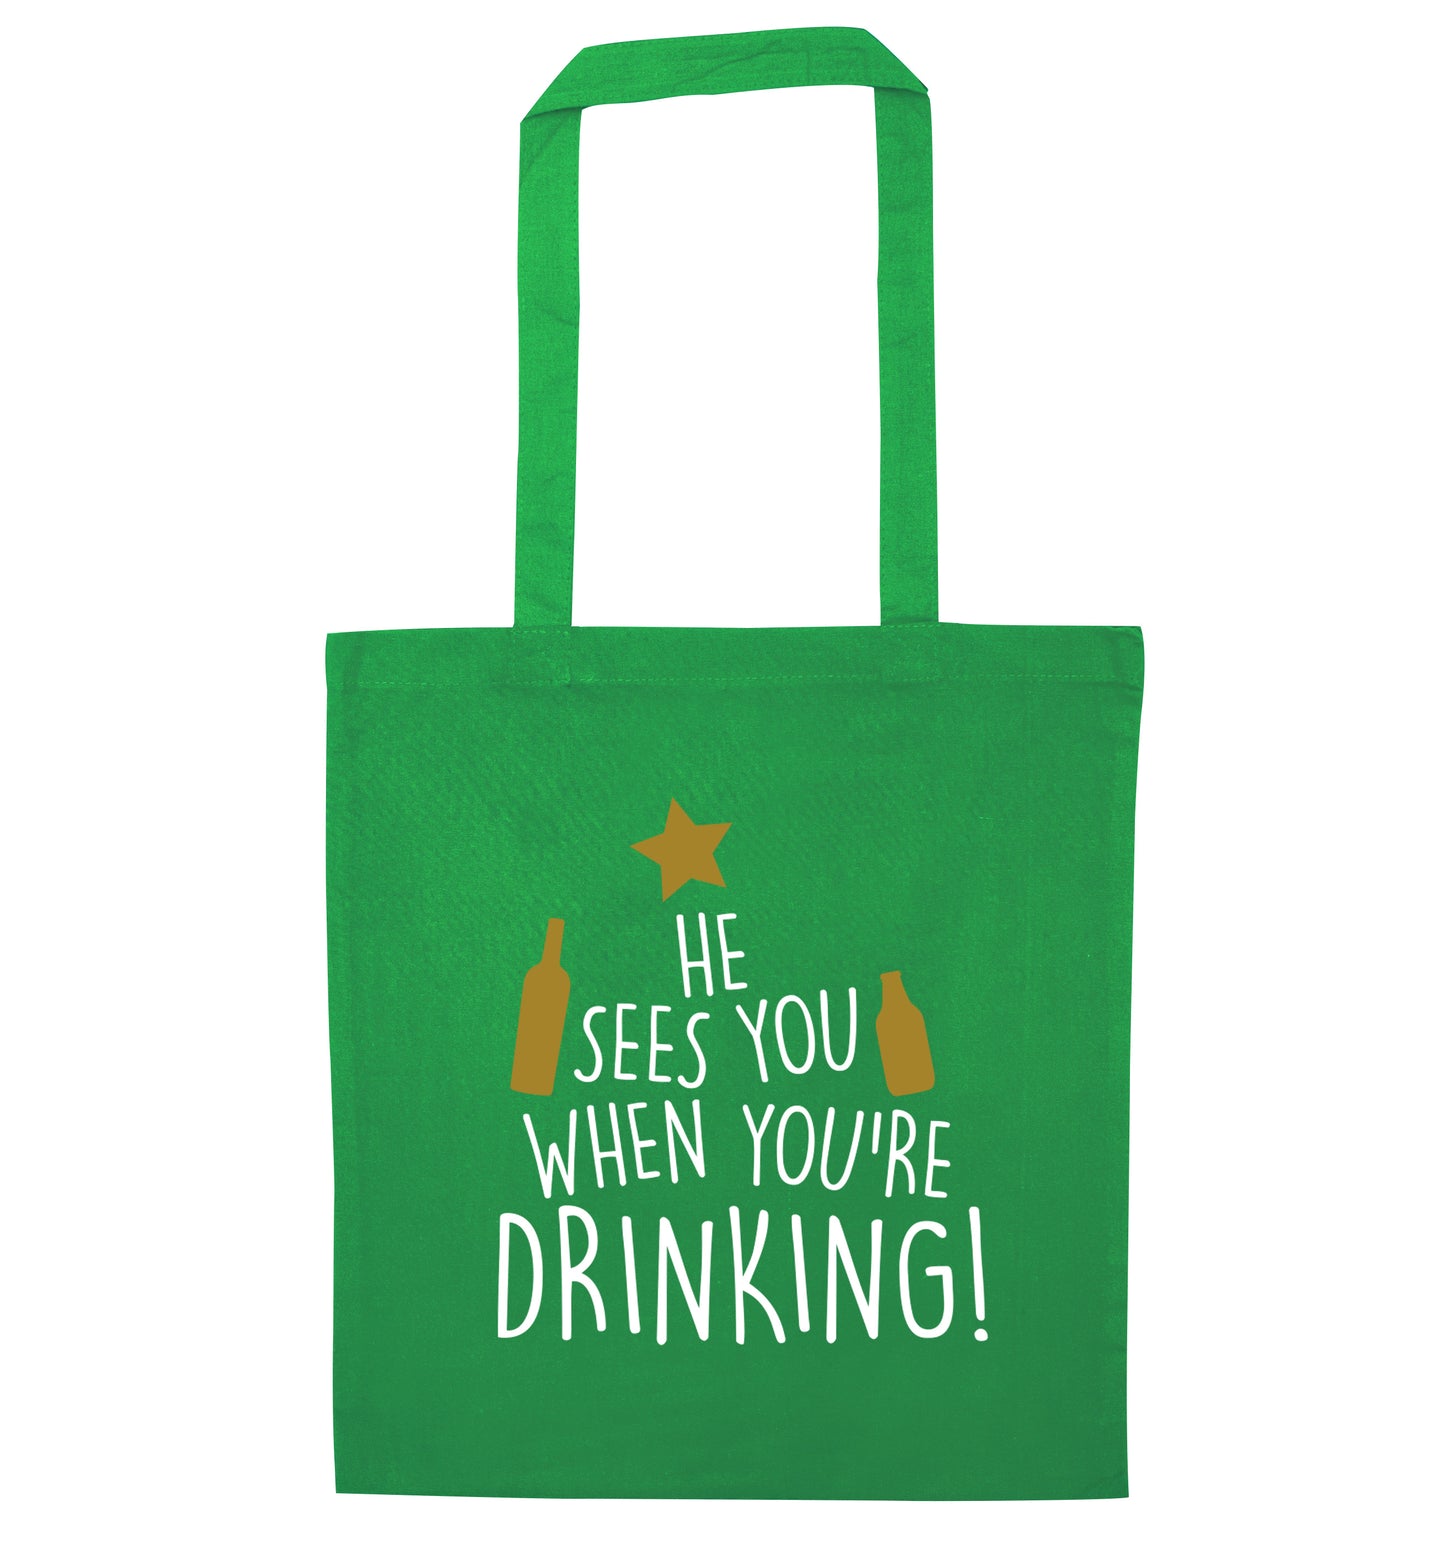 He sees you when you're drinking green tote bag